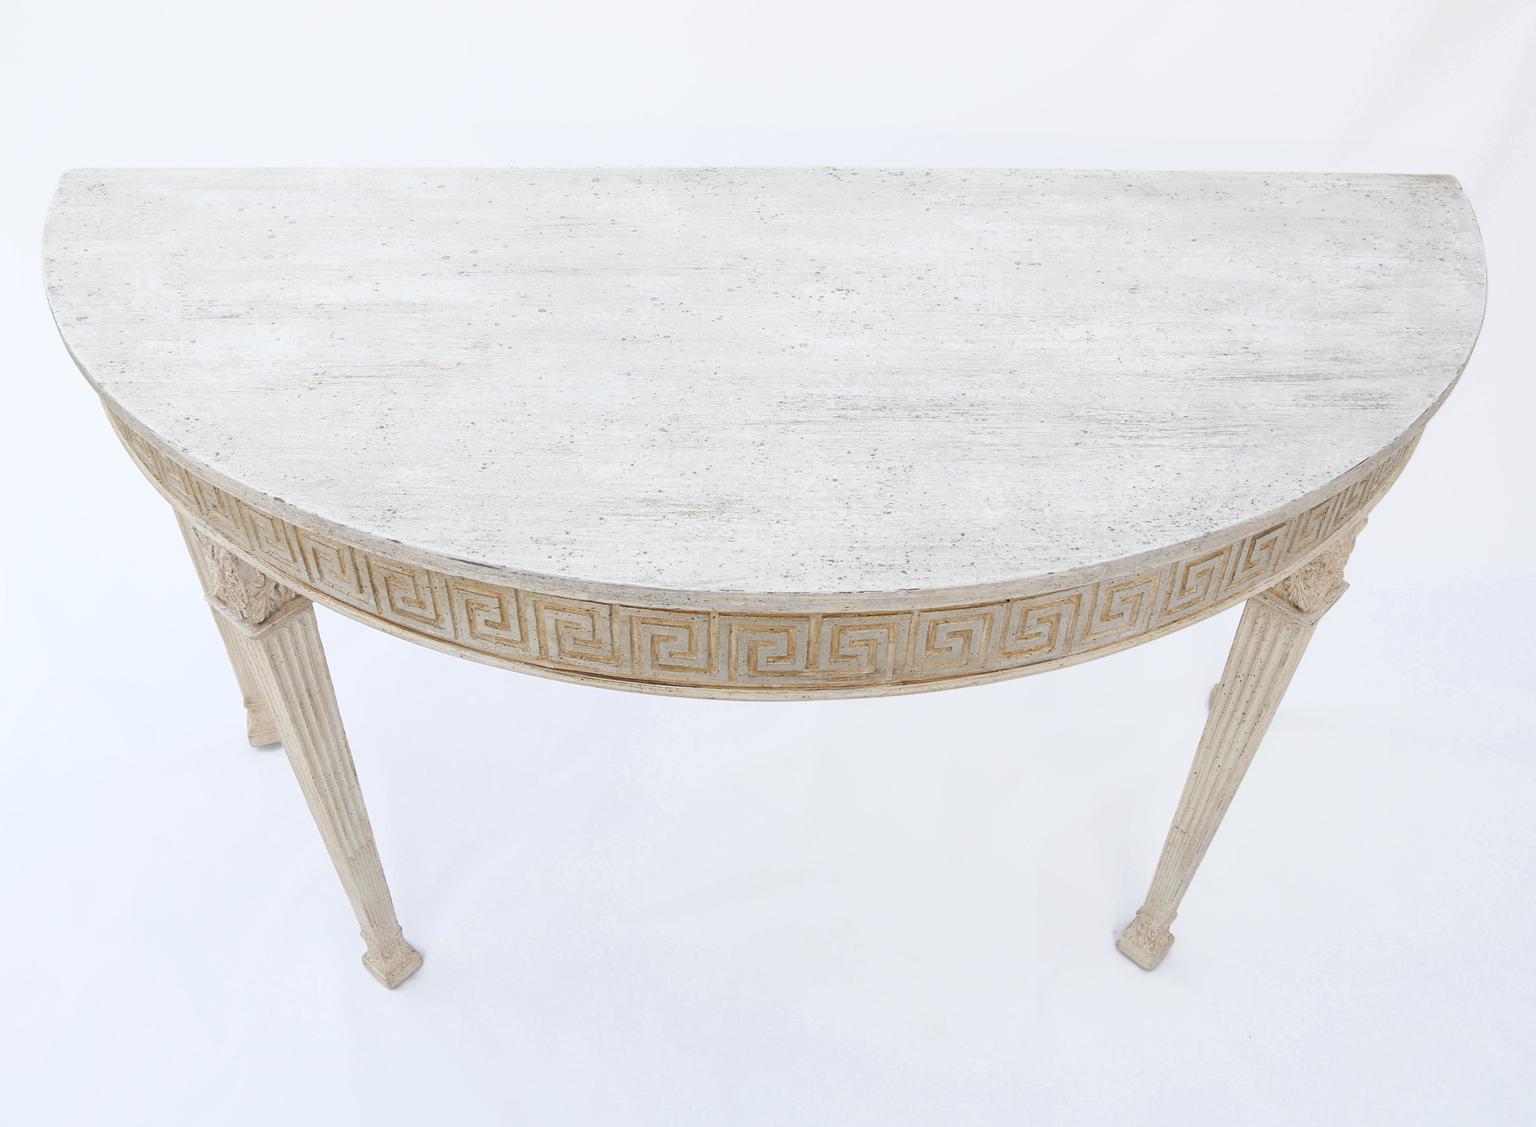 Neoclassical 19th Century Demilune Console with Greek Key Apron